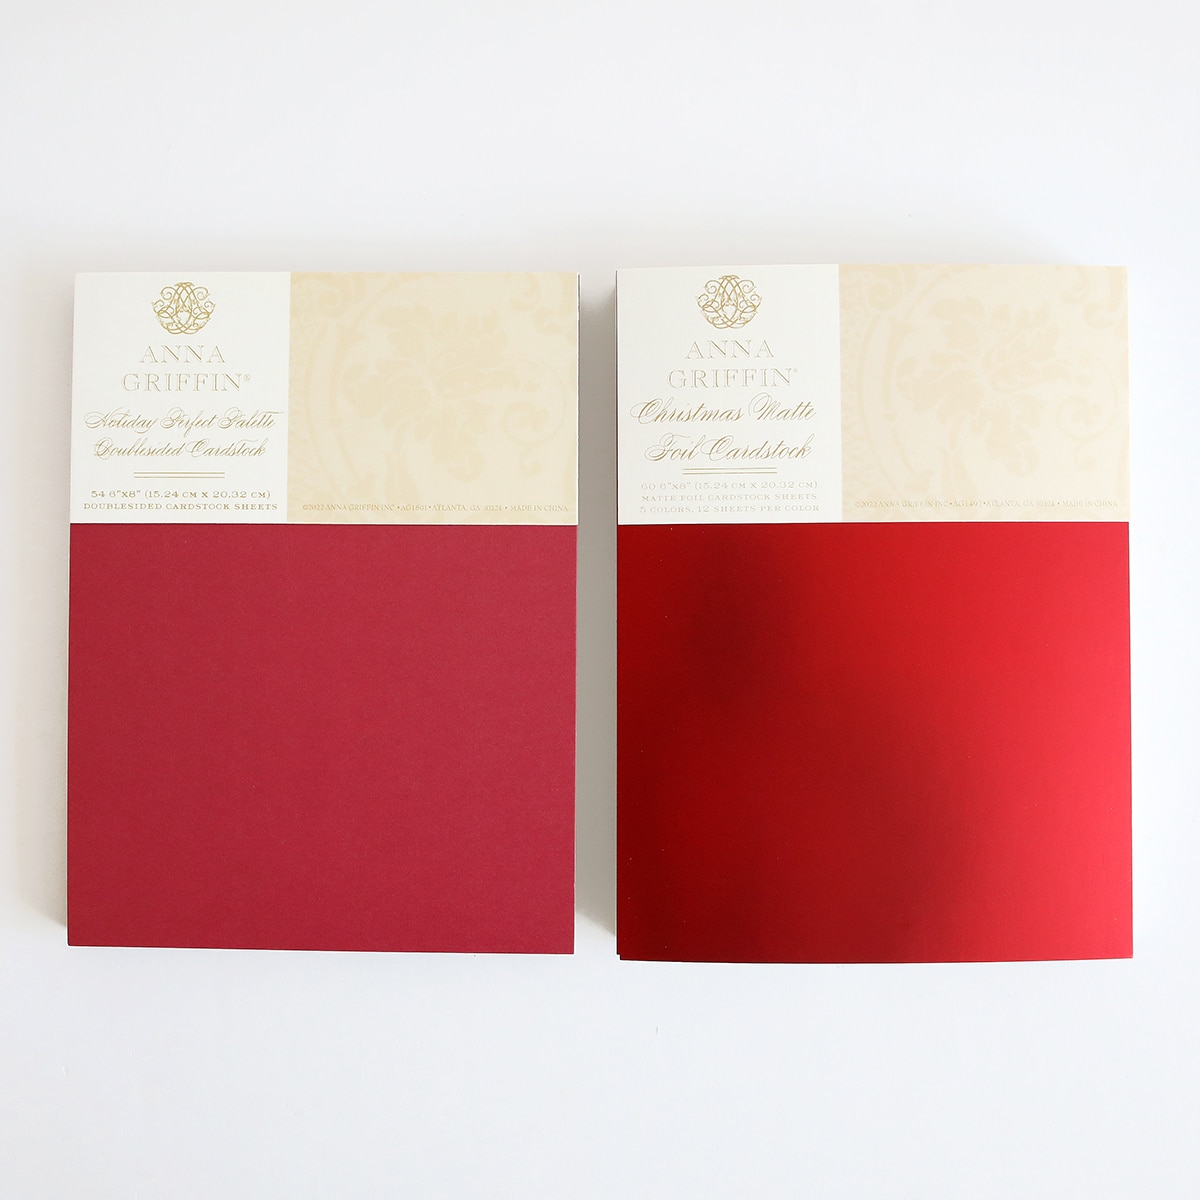 Two red and white notebooks on a white surface.